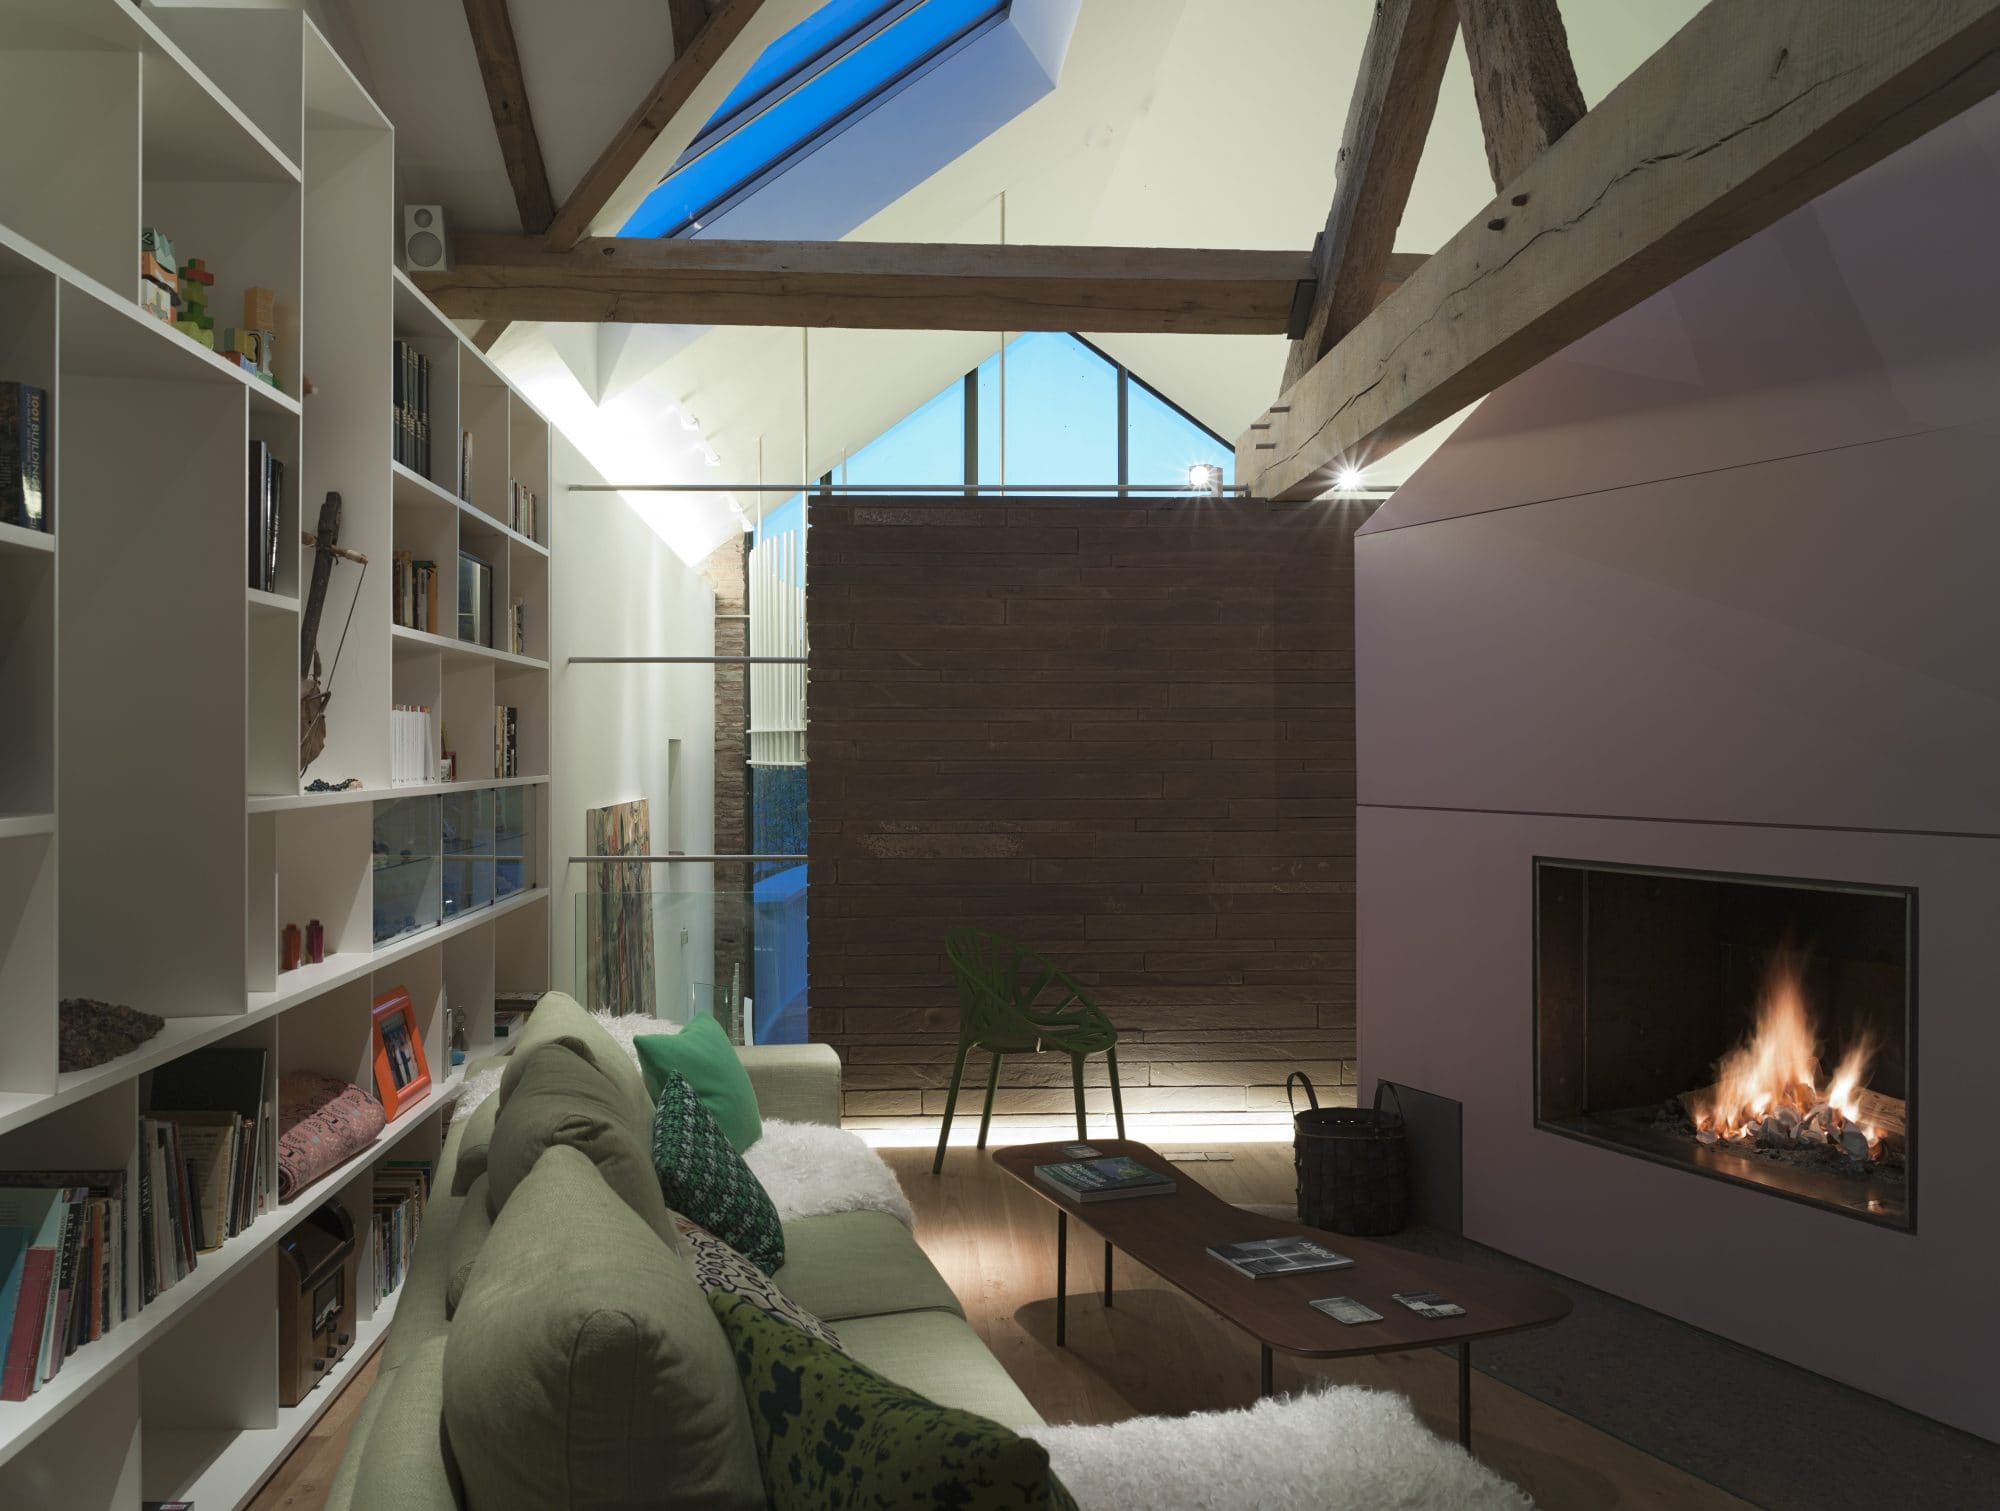 Interior of barn conversion. Left hand sided is an open bookcase, in front is a green sofa, which sits in front of am open fire, set into a lilac wall on the right hand side of the frame.